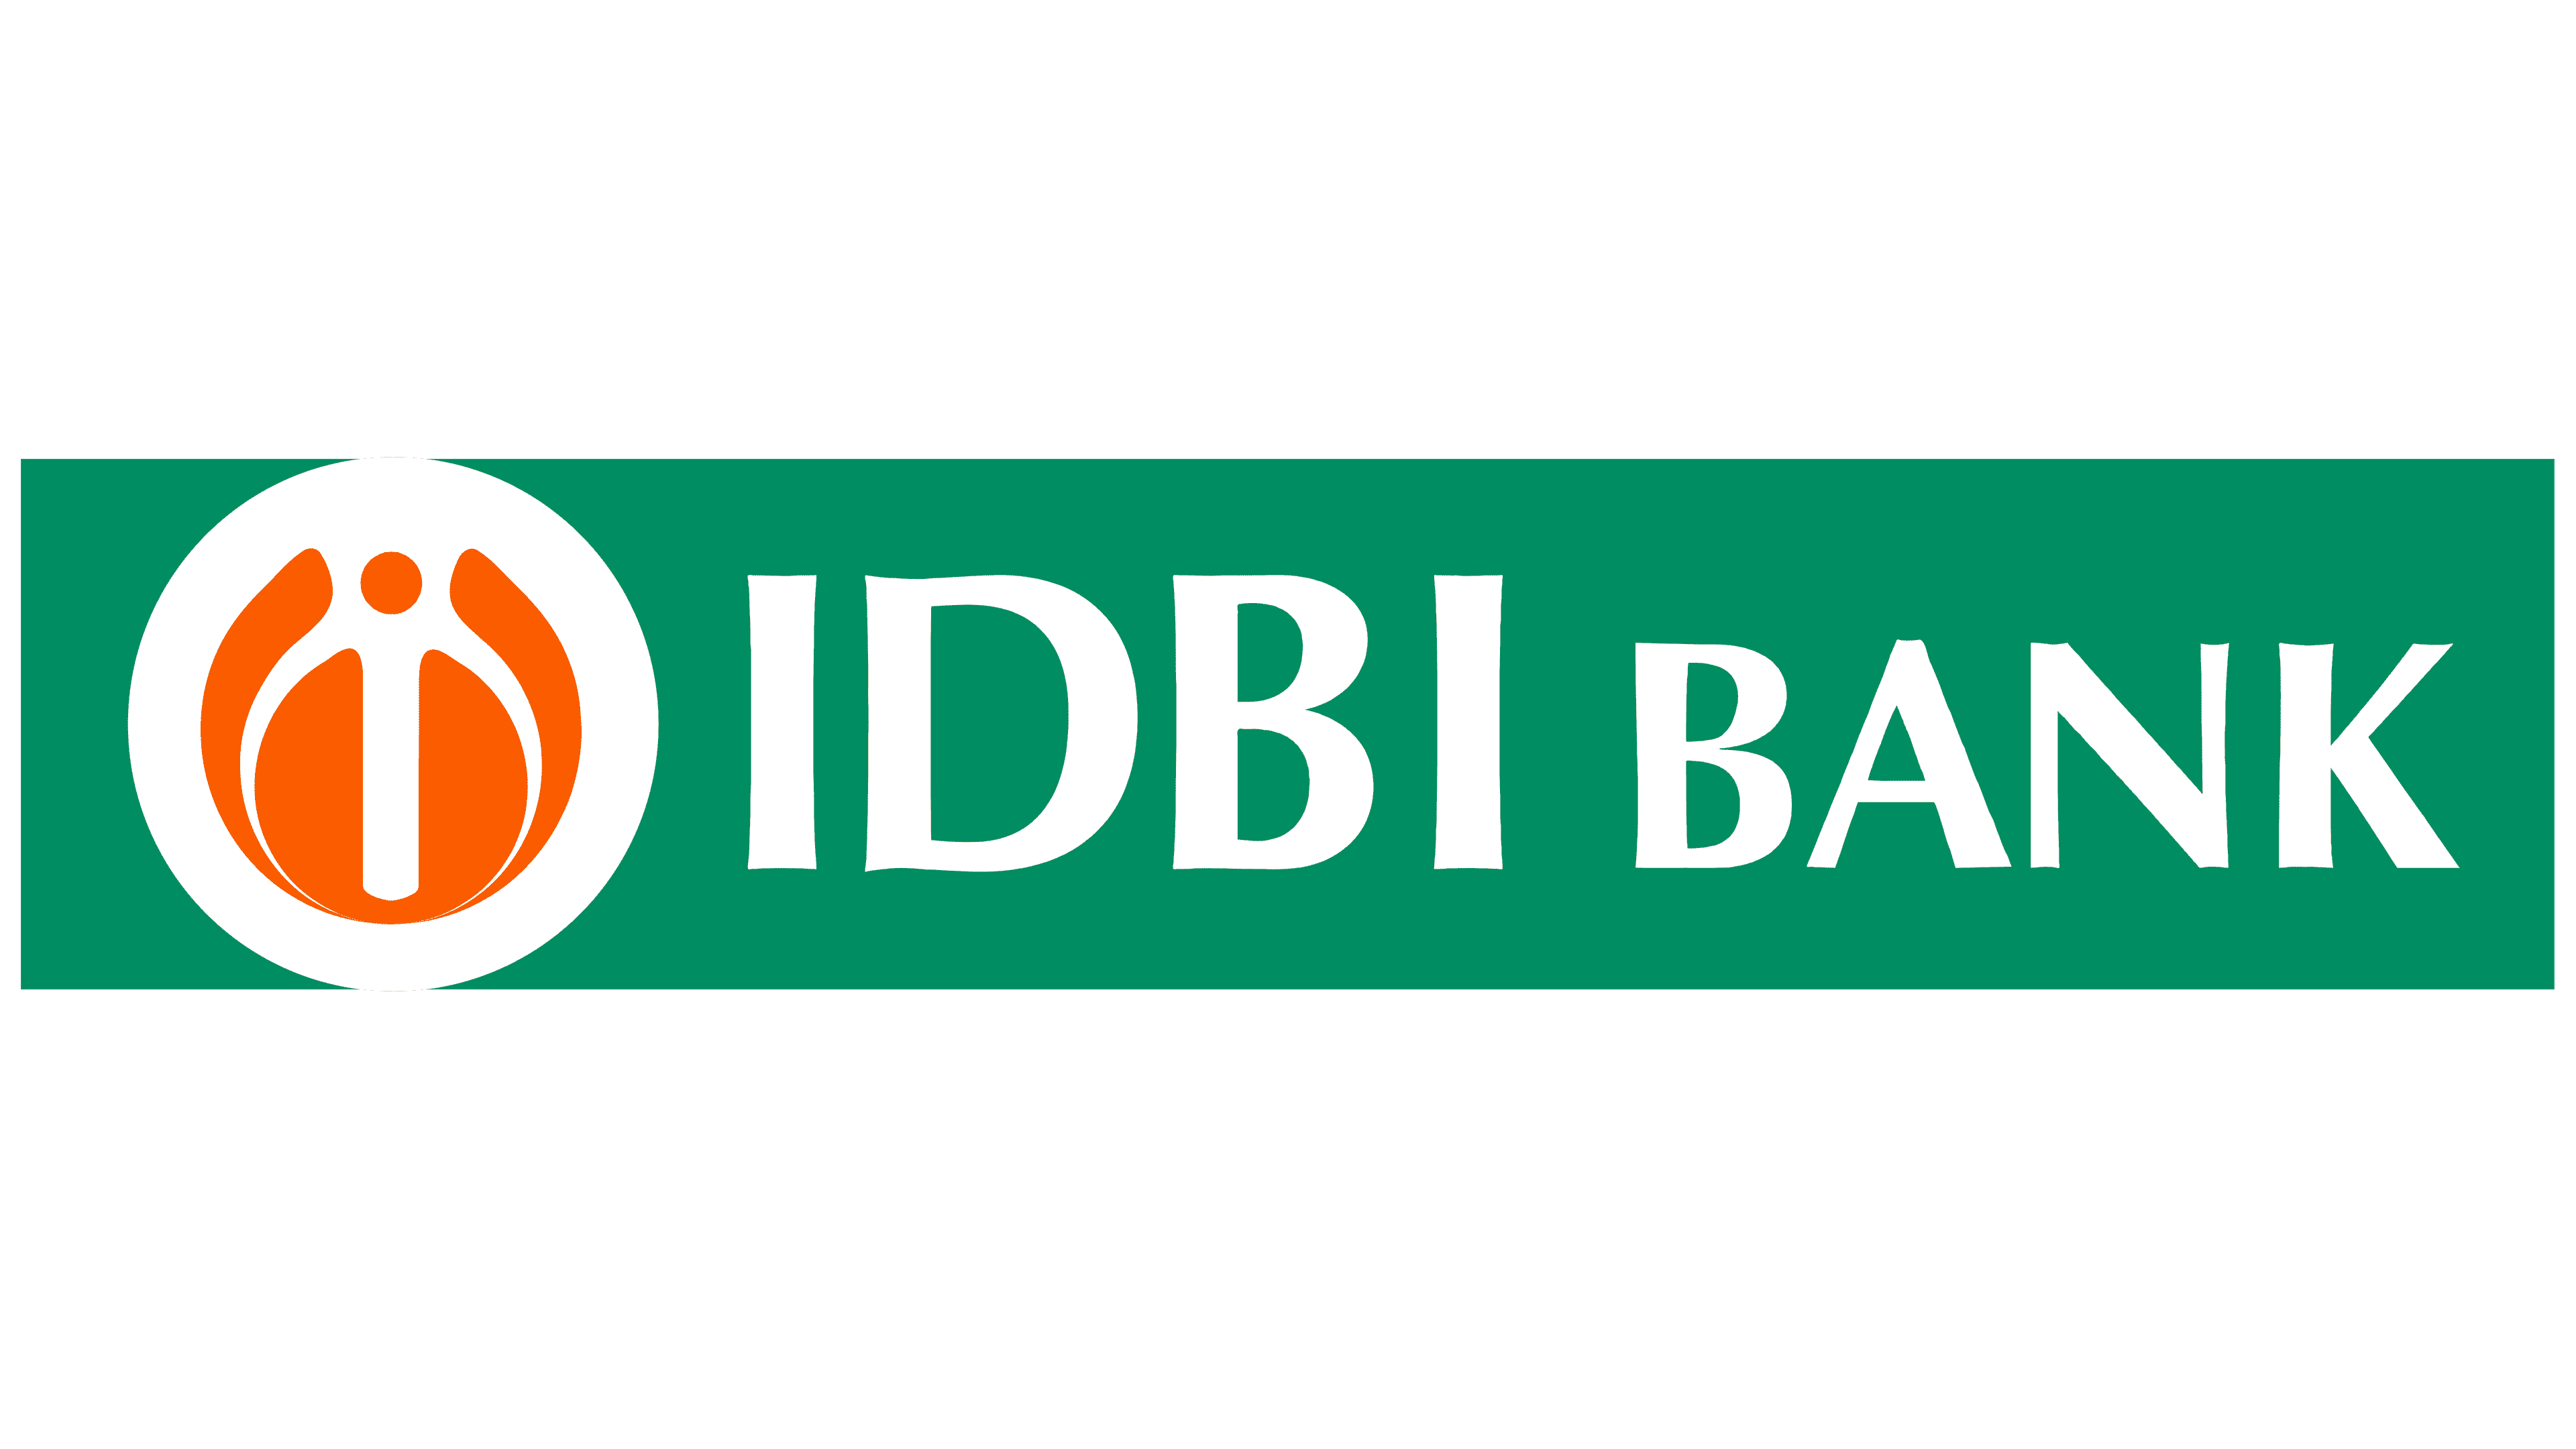 idbi bank: Your Path to Financial Freedom and Security